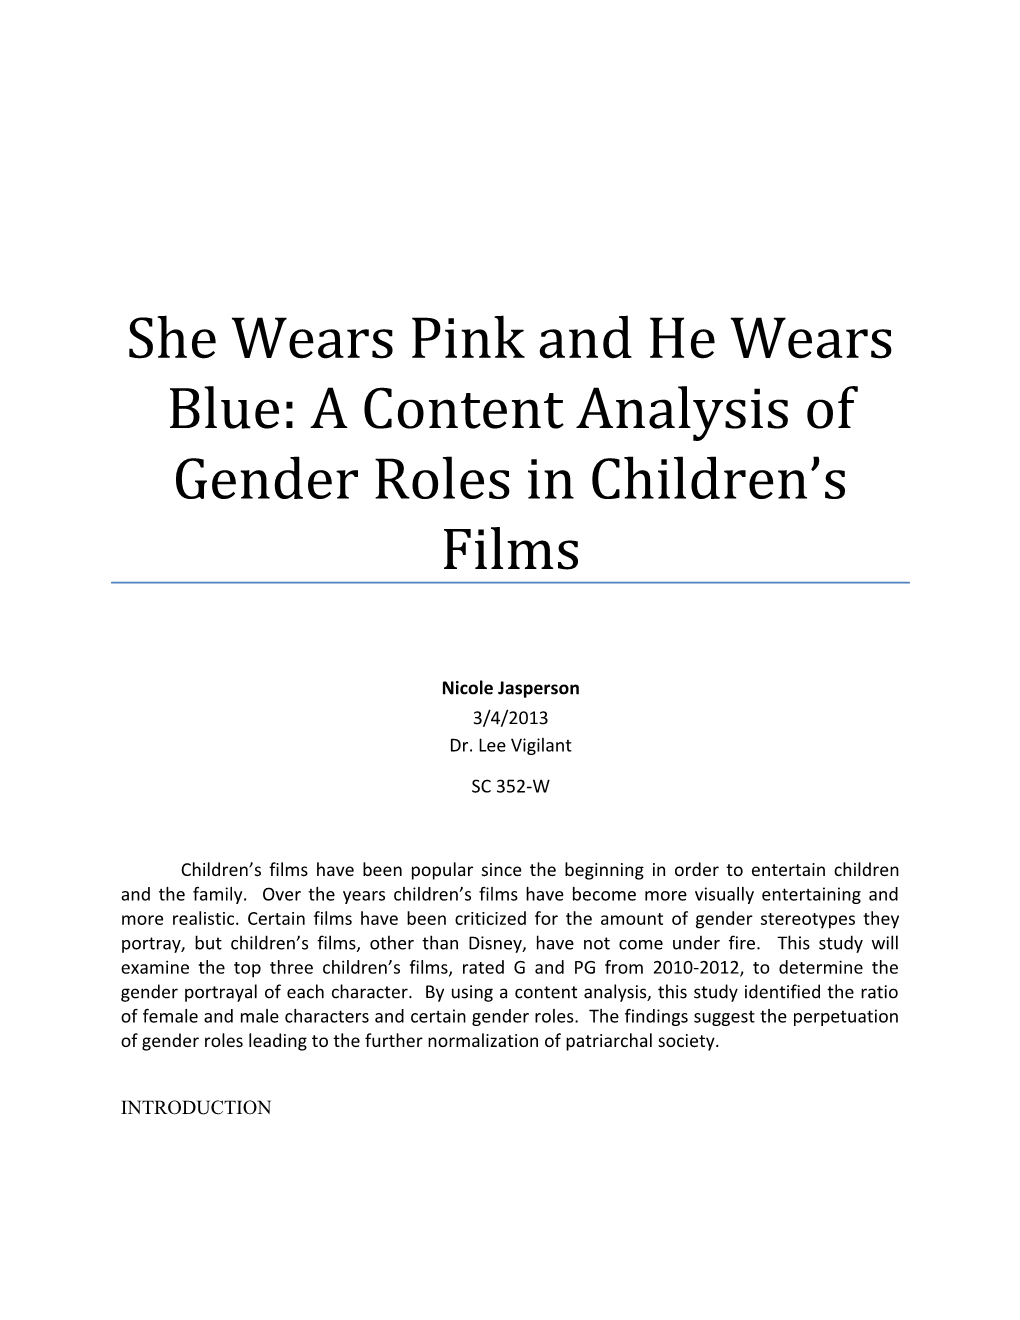 She Wears Pink and He Wears Blue: a Content Analysis of Gender Roles in Children S Films